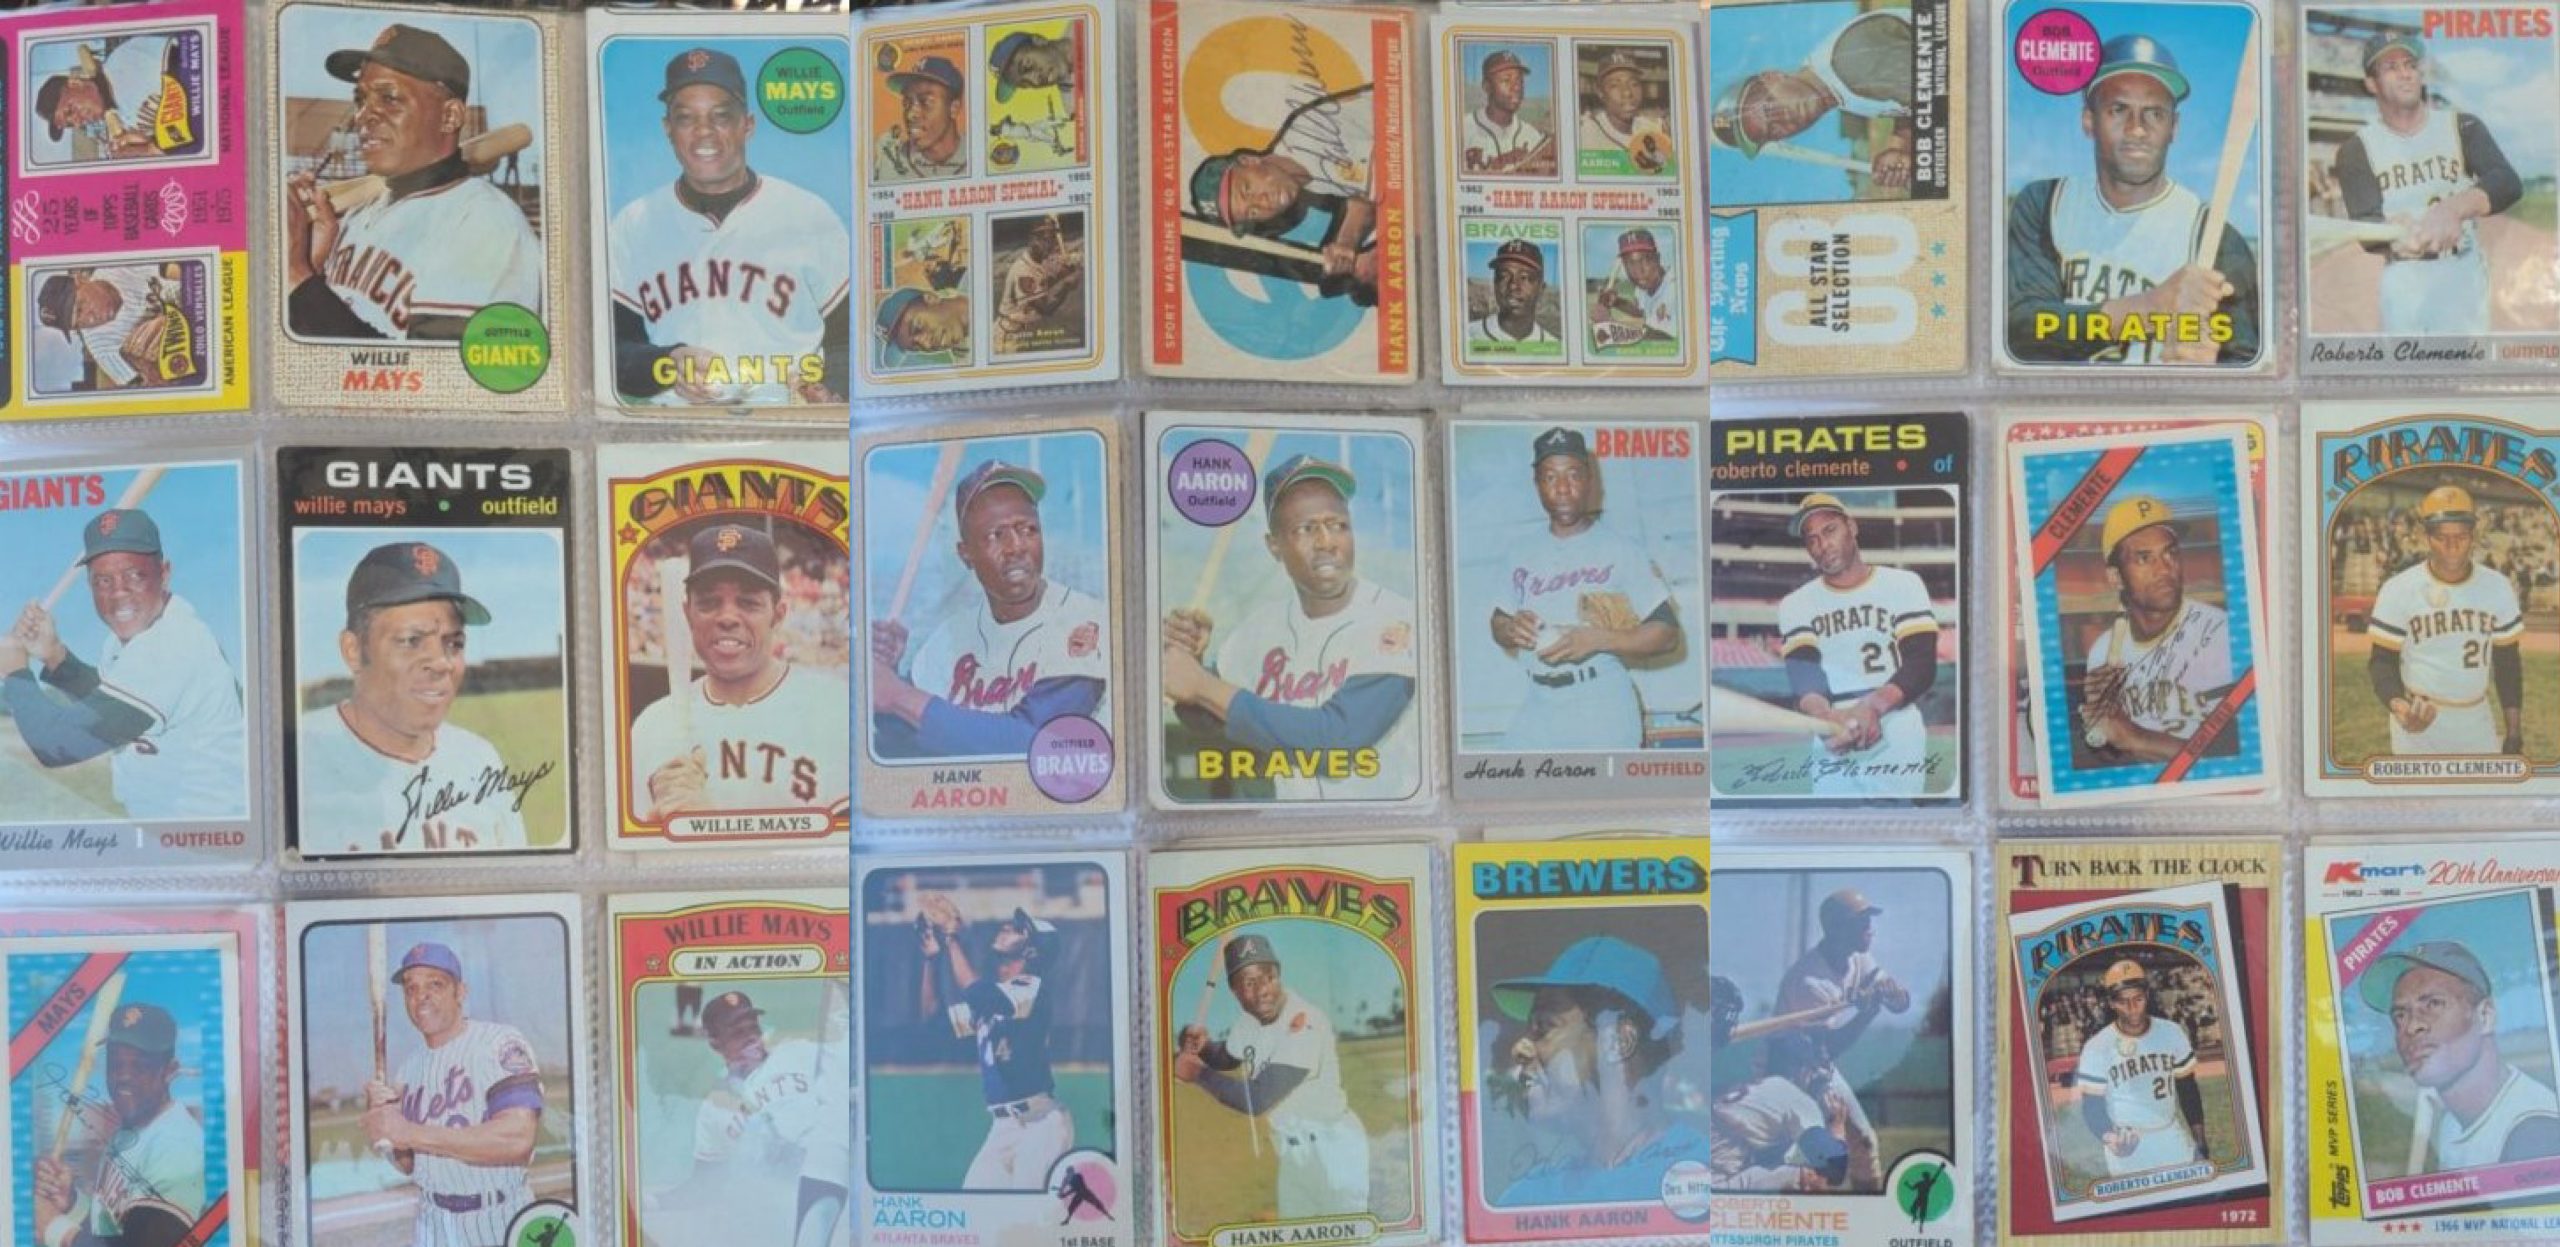 A collection of baseball cards in a display case.